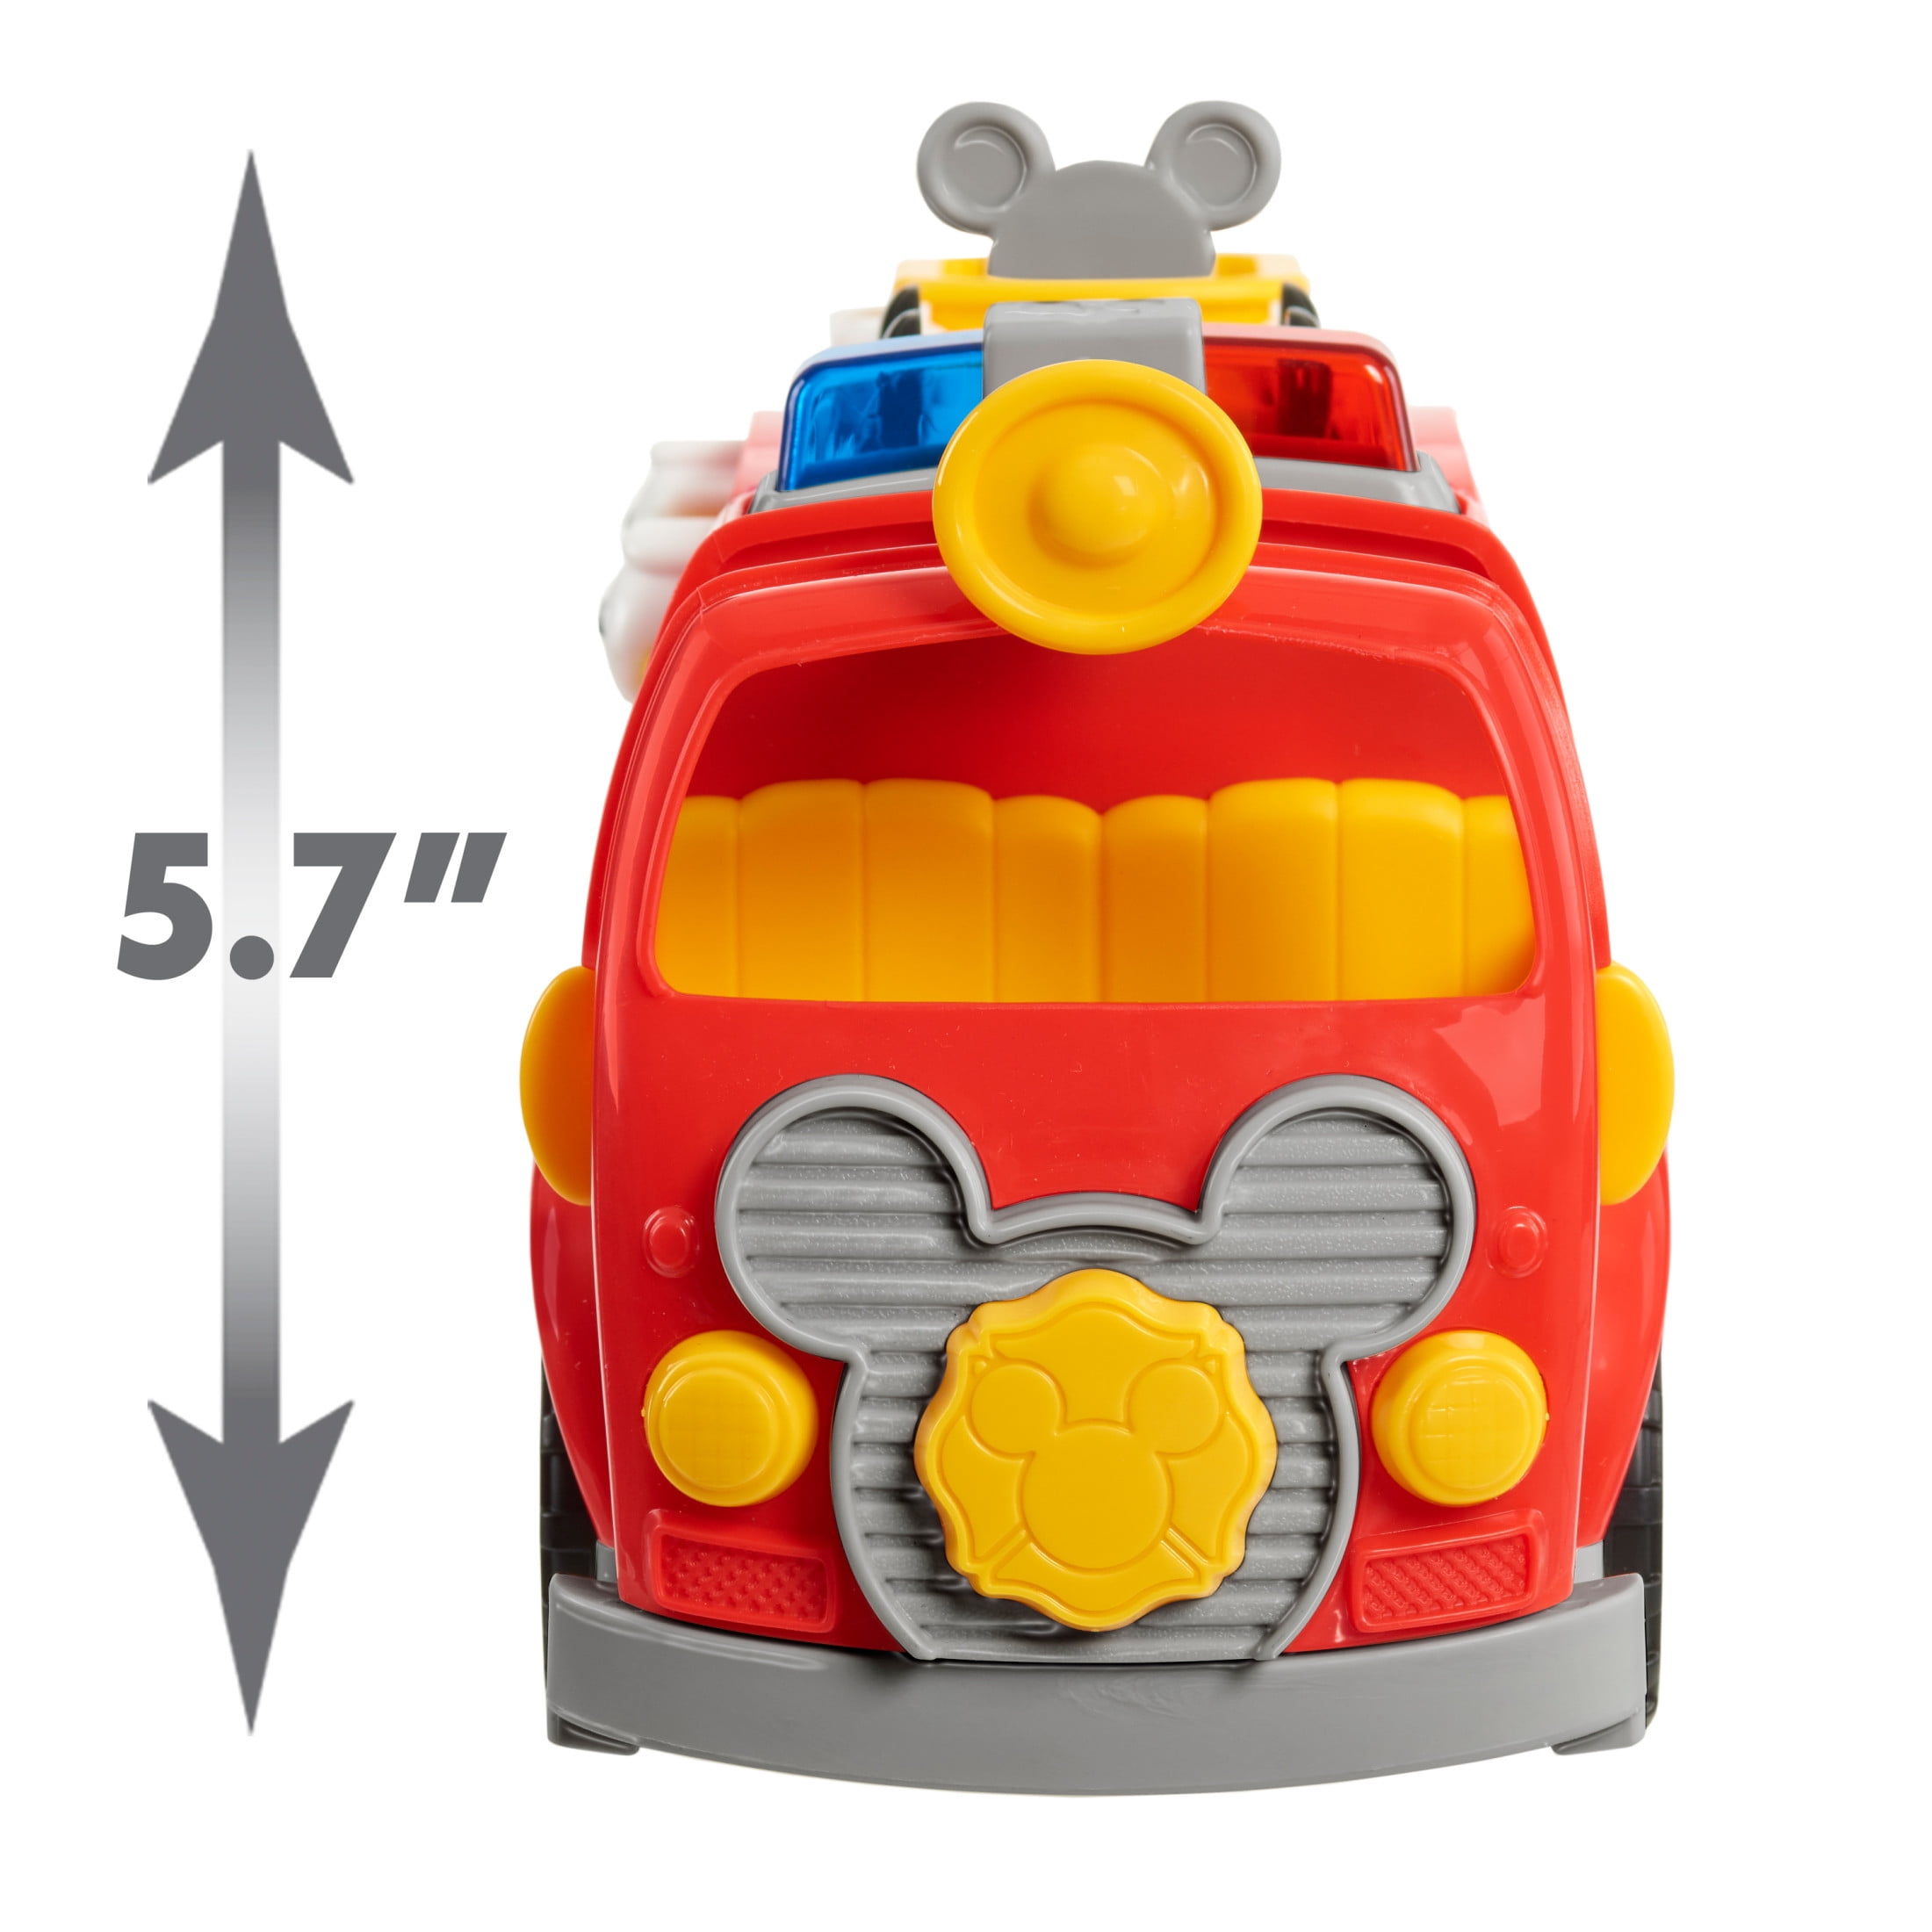 Disney's Mickey Mouse Mickey's Fire Engine, Figure and Vehicle